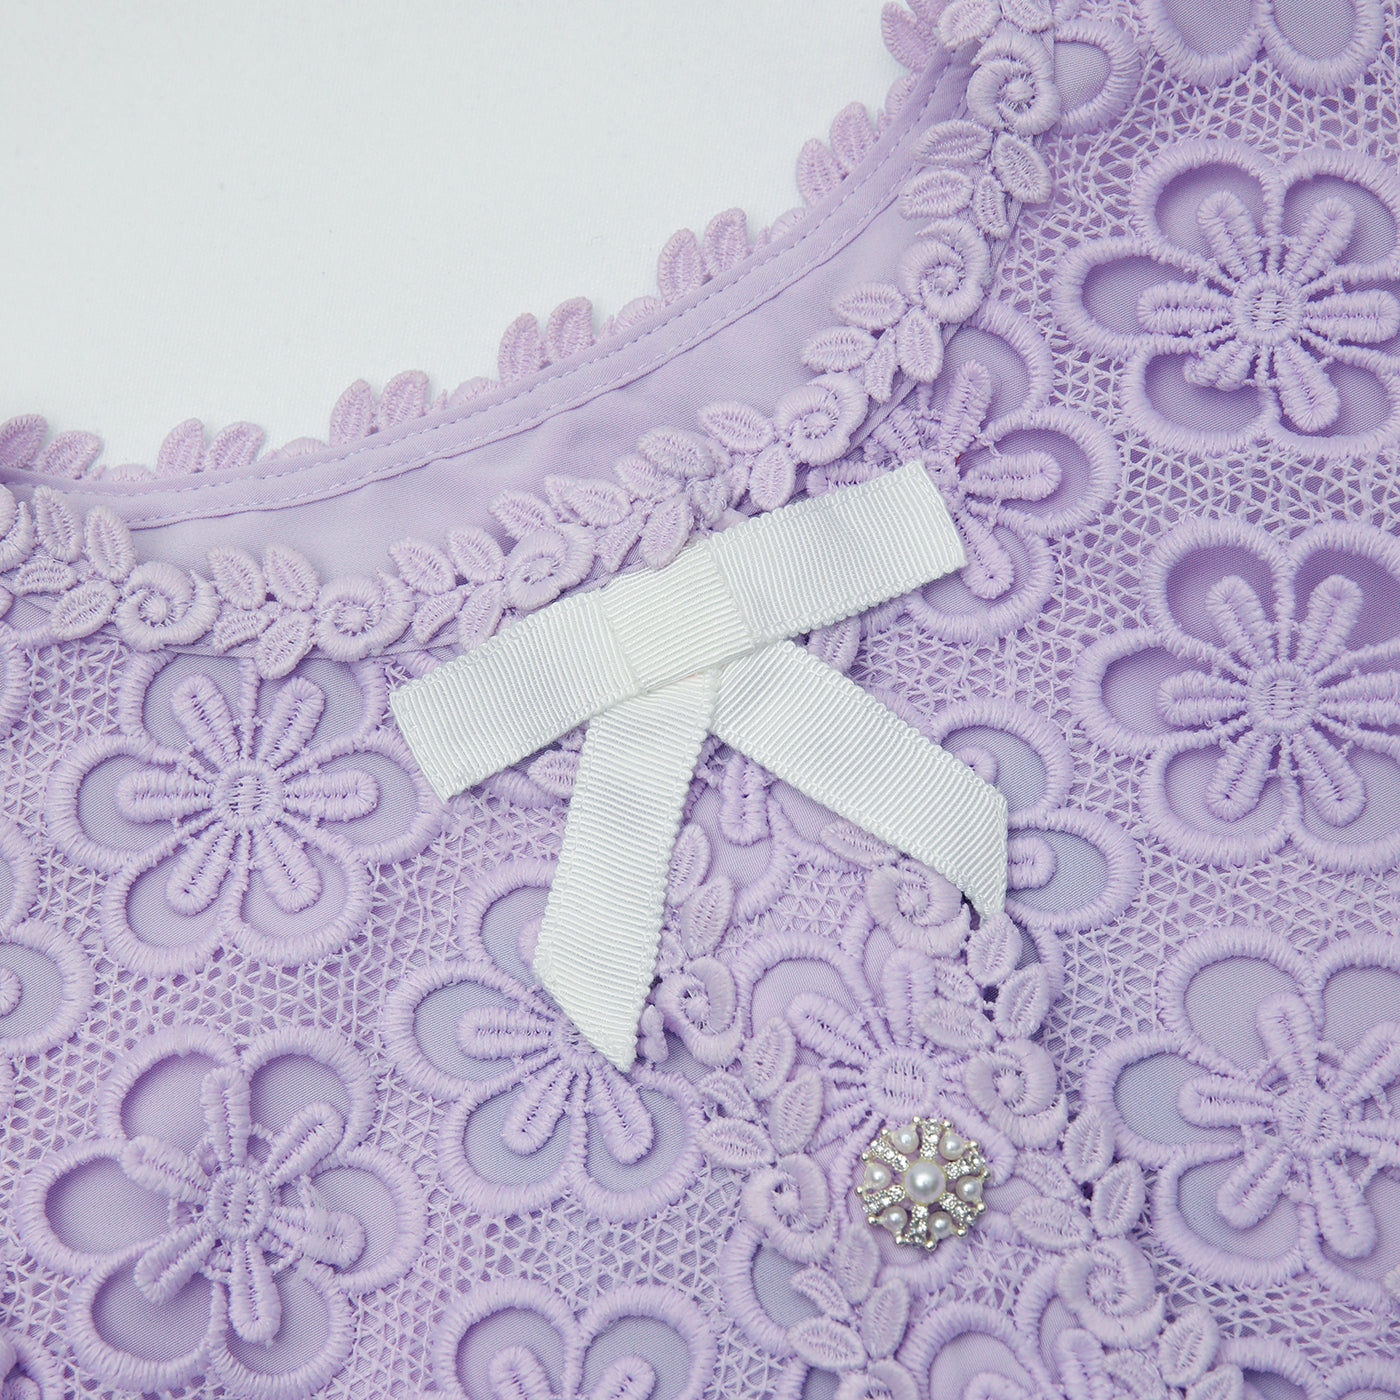 A close up of the fabric for the Lilac Floral Lace Jacket